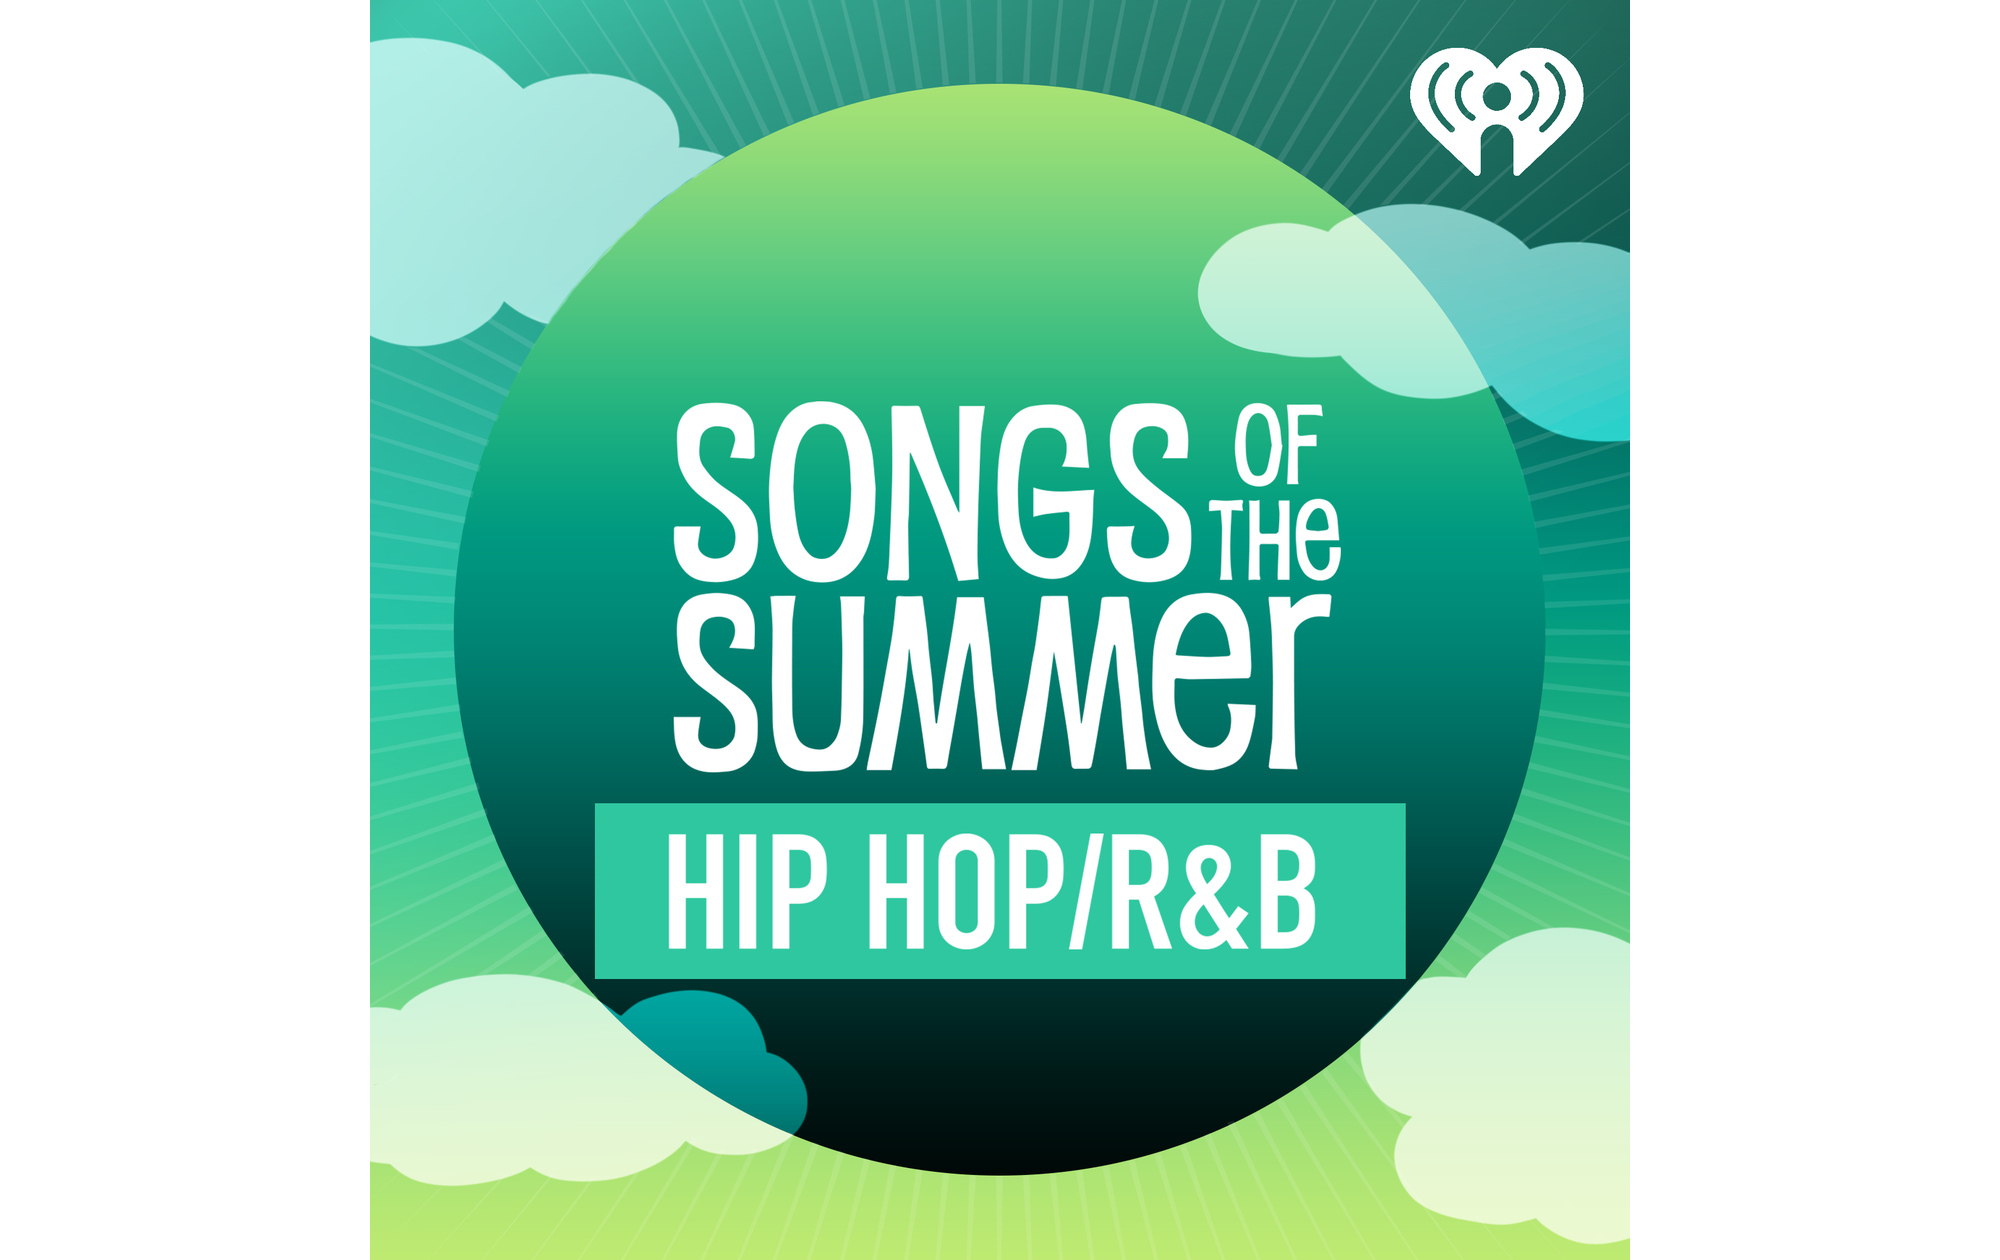 Songs Of Summer HipHop & R&B iHeart